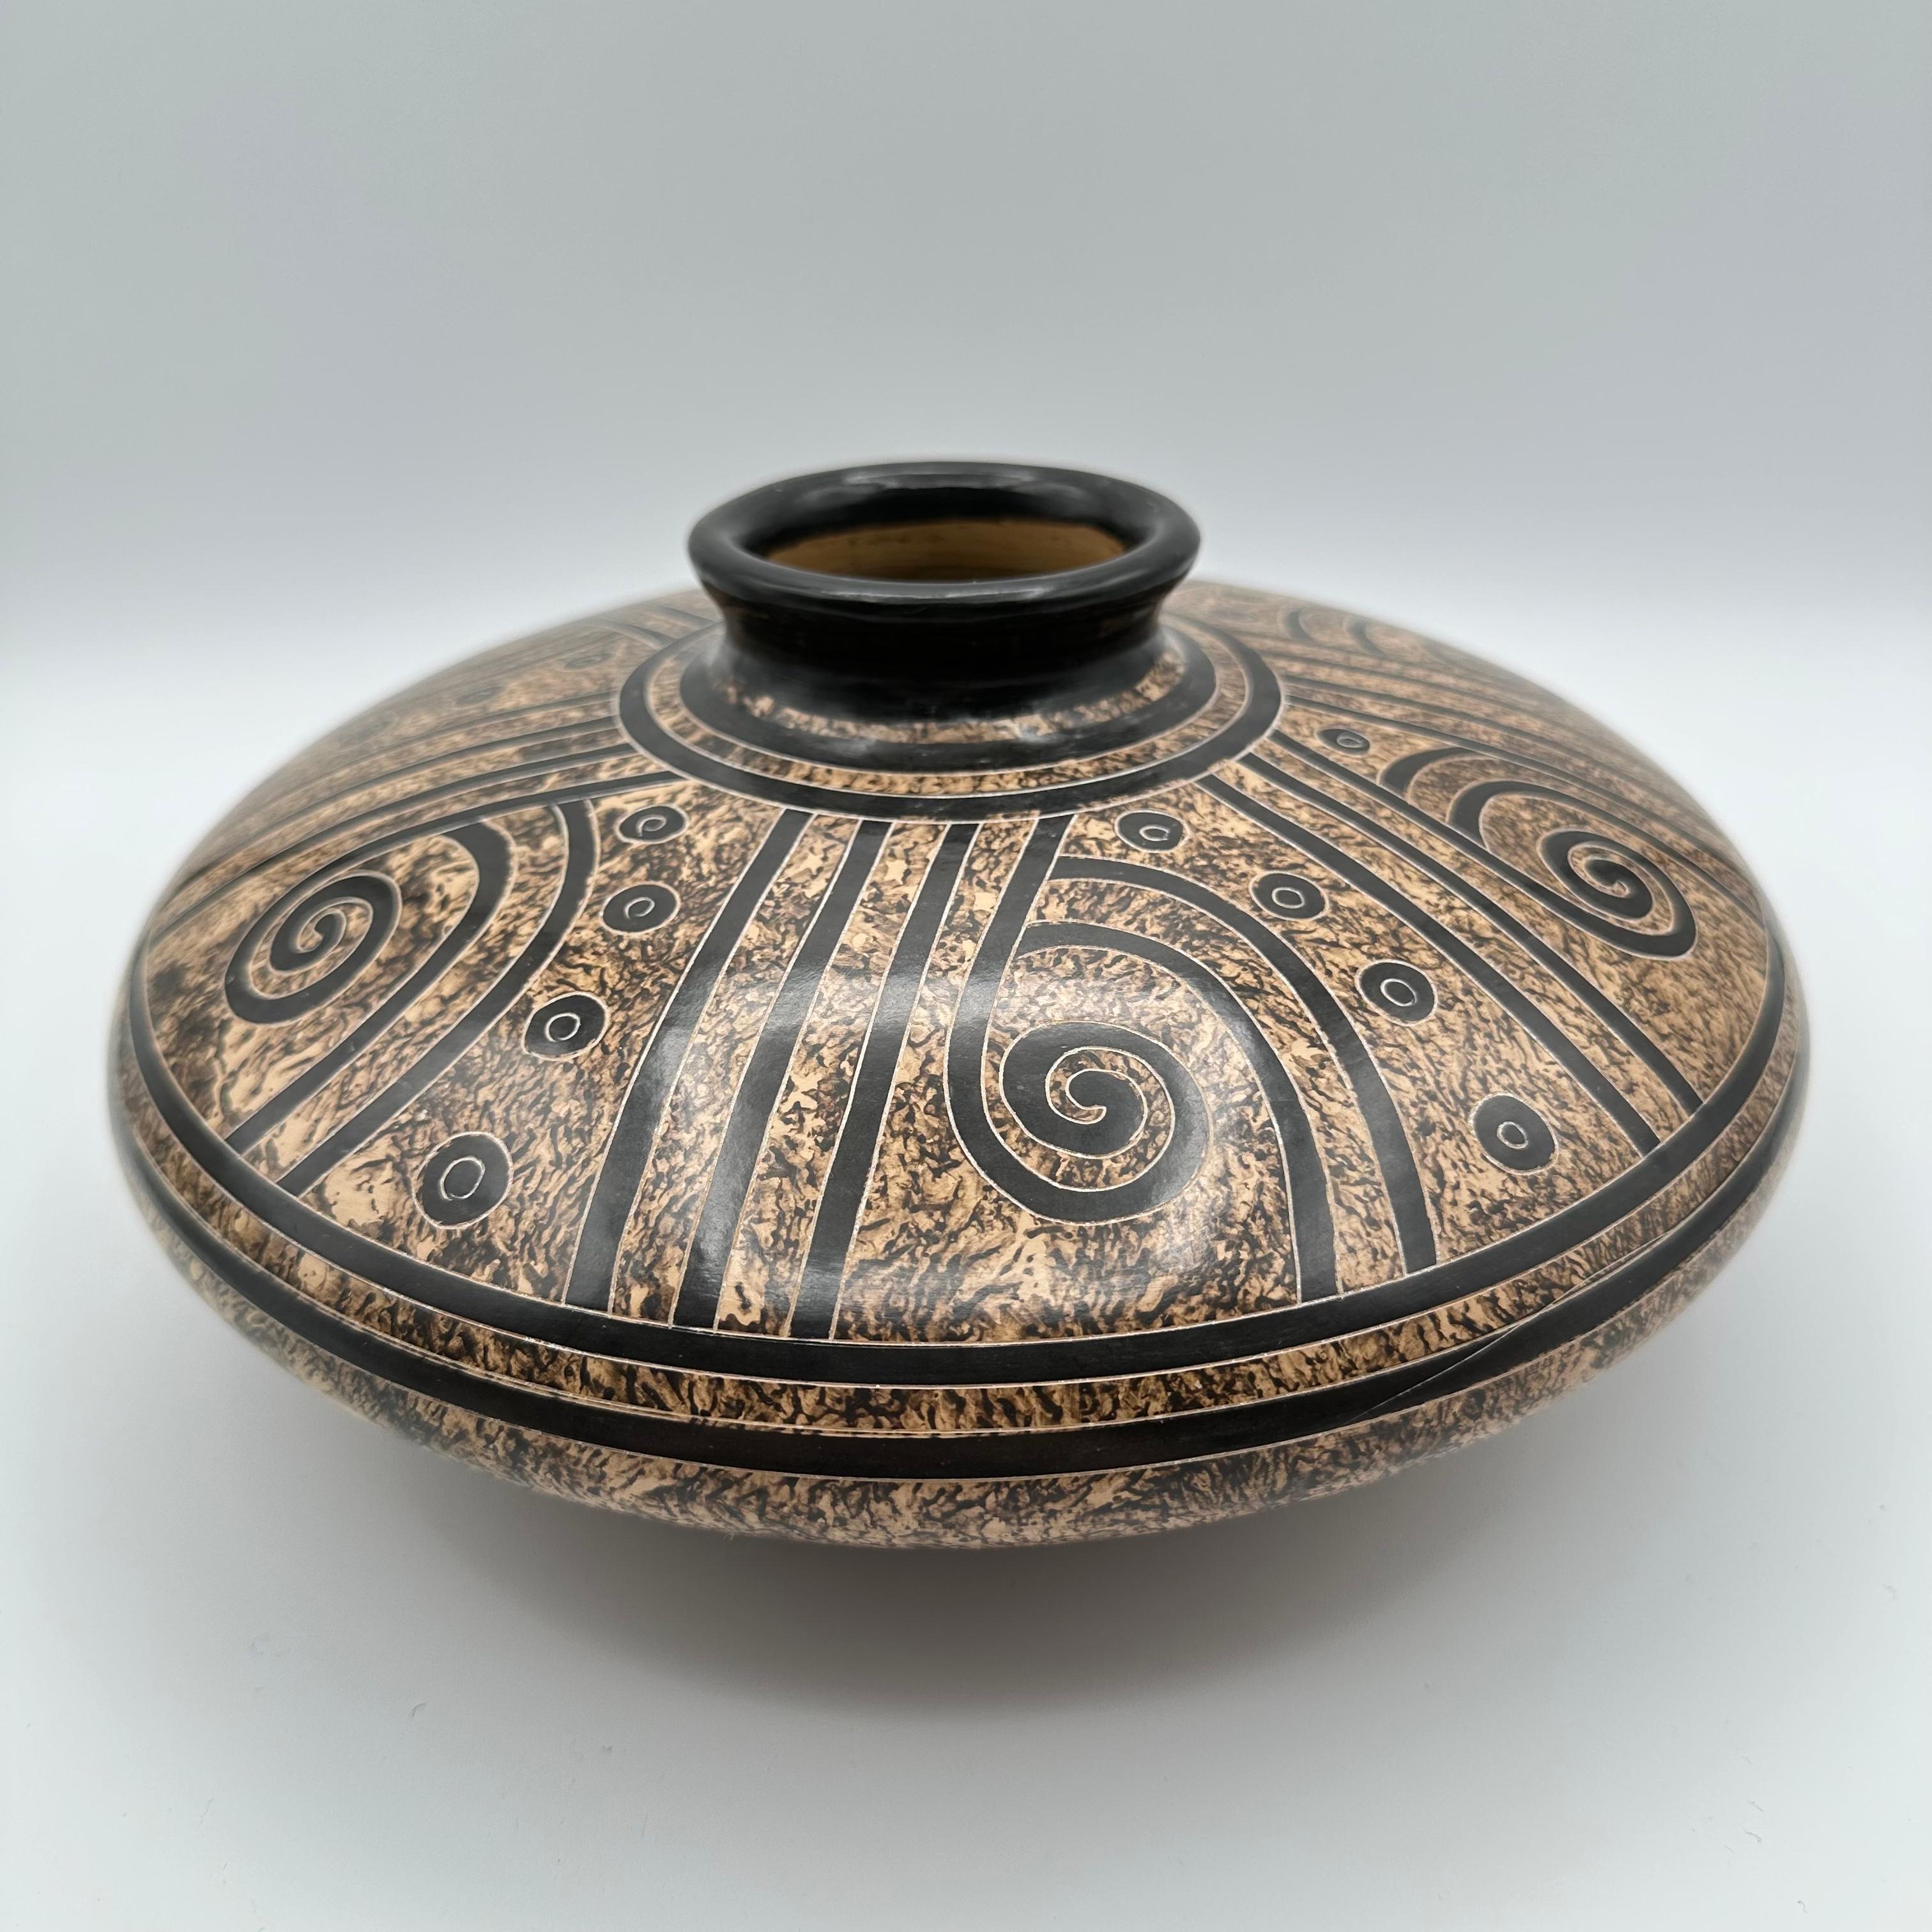 Handmade ceramic pottery vase in brown, beige, taupe, sand and other earth tones with geometric, spiraling motif. Contrasting dark and light glazes enhance the design. Made in the town of San Juan de Oriente in Nicaragua, famous as the home of an